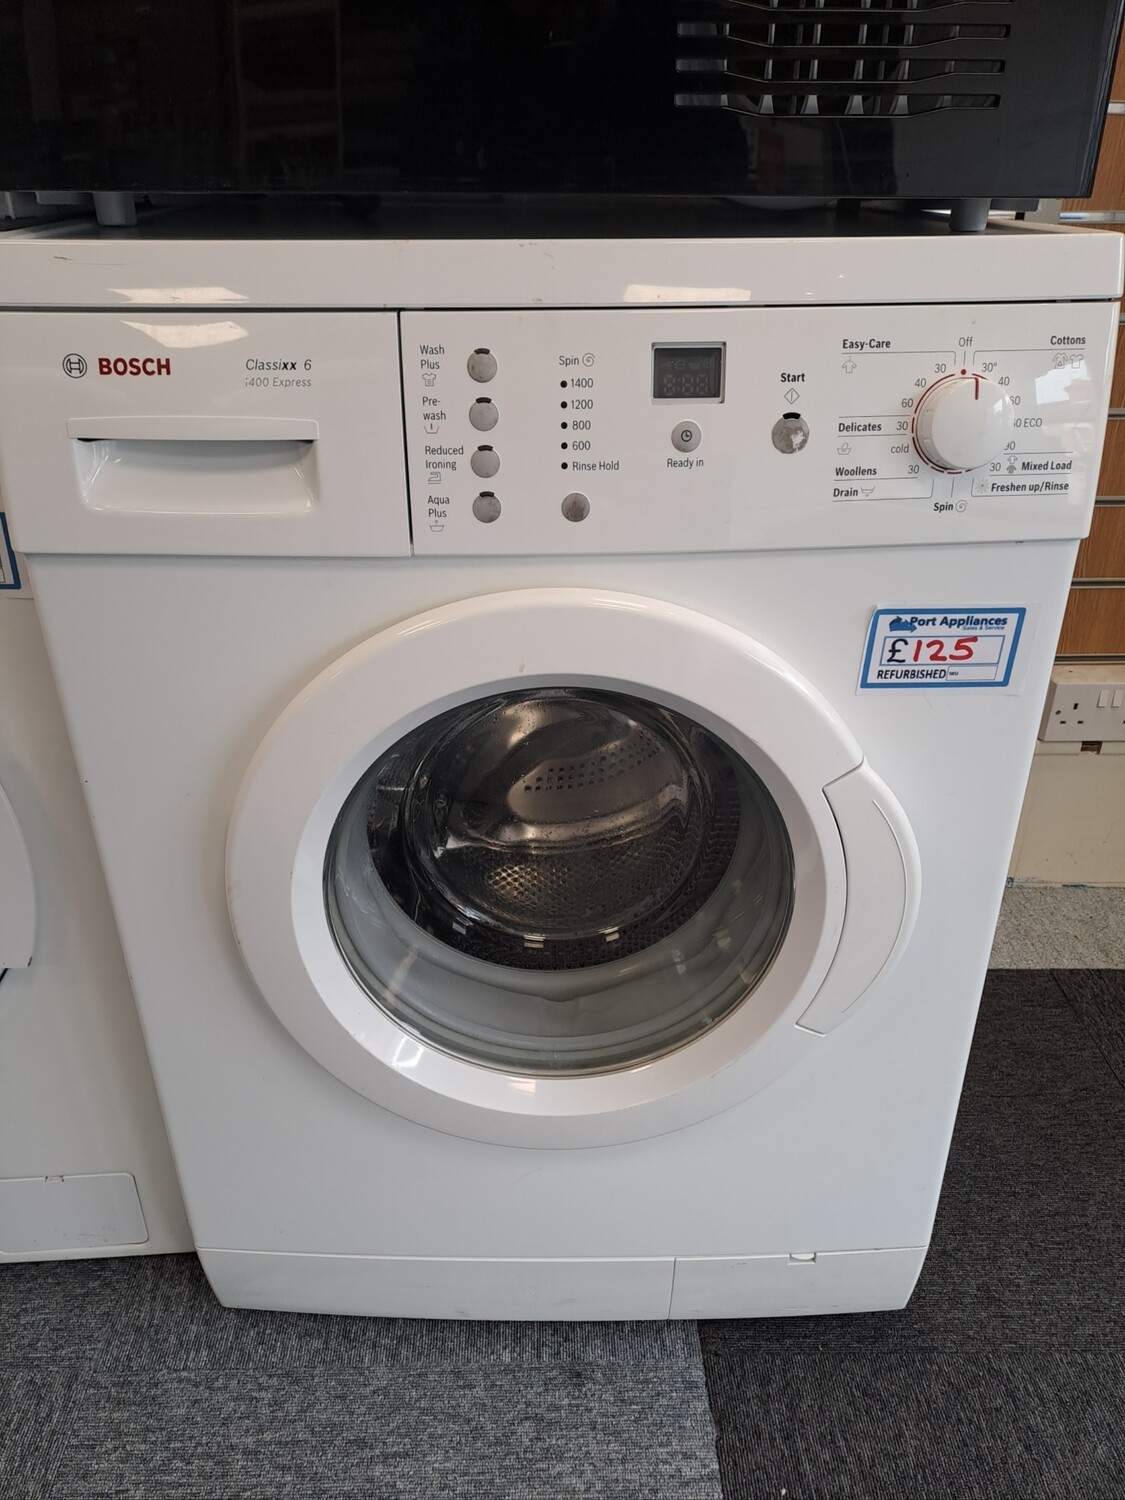 Bosch WAE28363GB 7kg Load 1200 Spin Washing Machine - White - Refurbished 6 Month Guarantee. This item is located in our Whitby Road Shop 